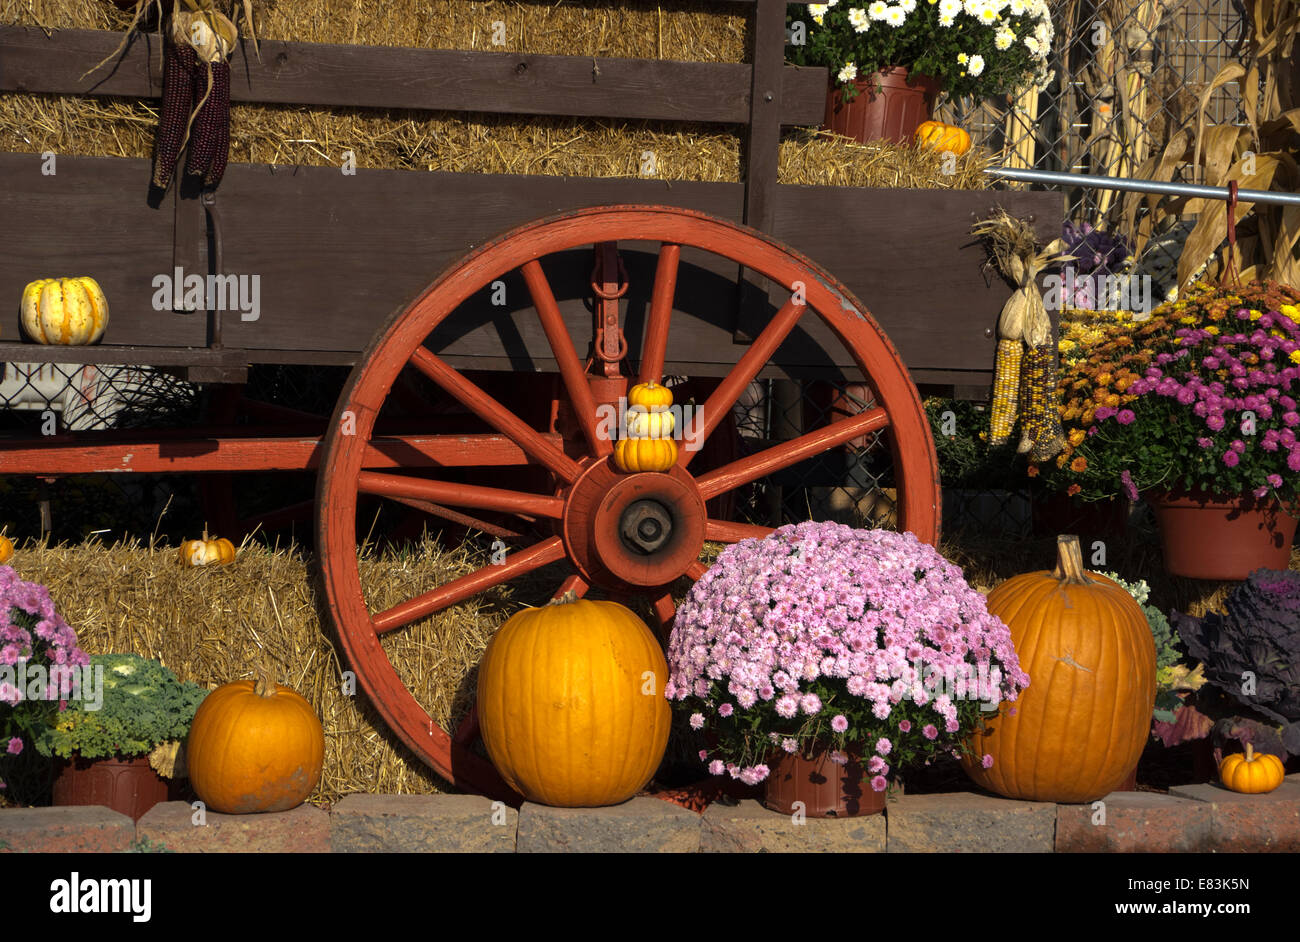 Autumn farm produce and flower display at vegetable market Stock Photo